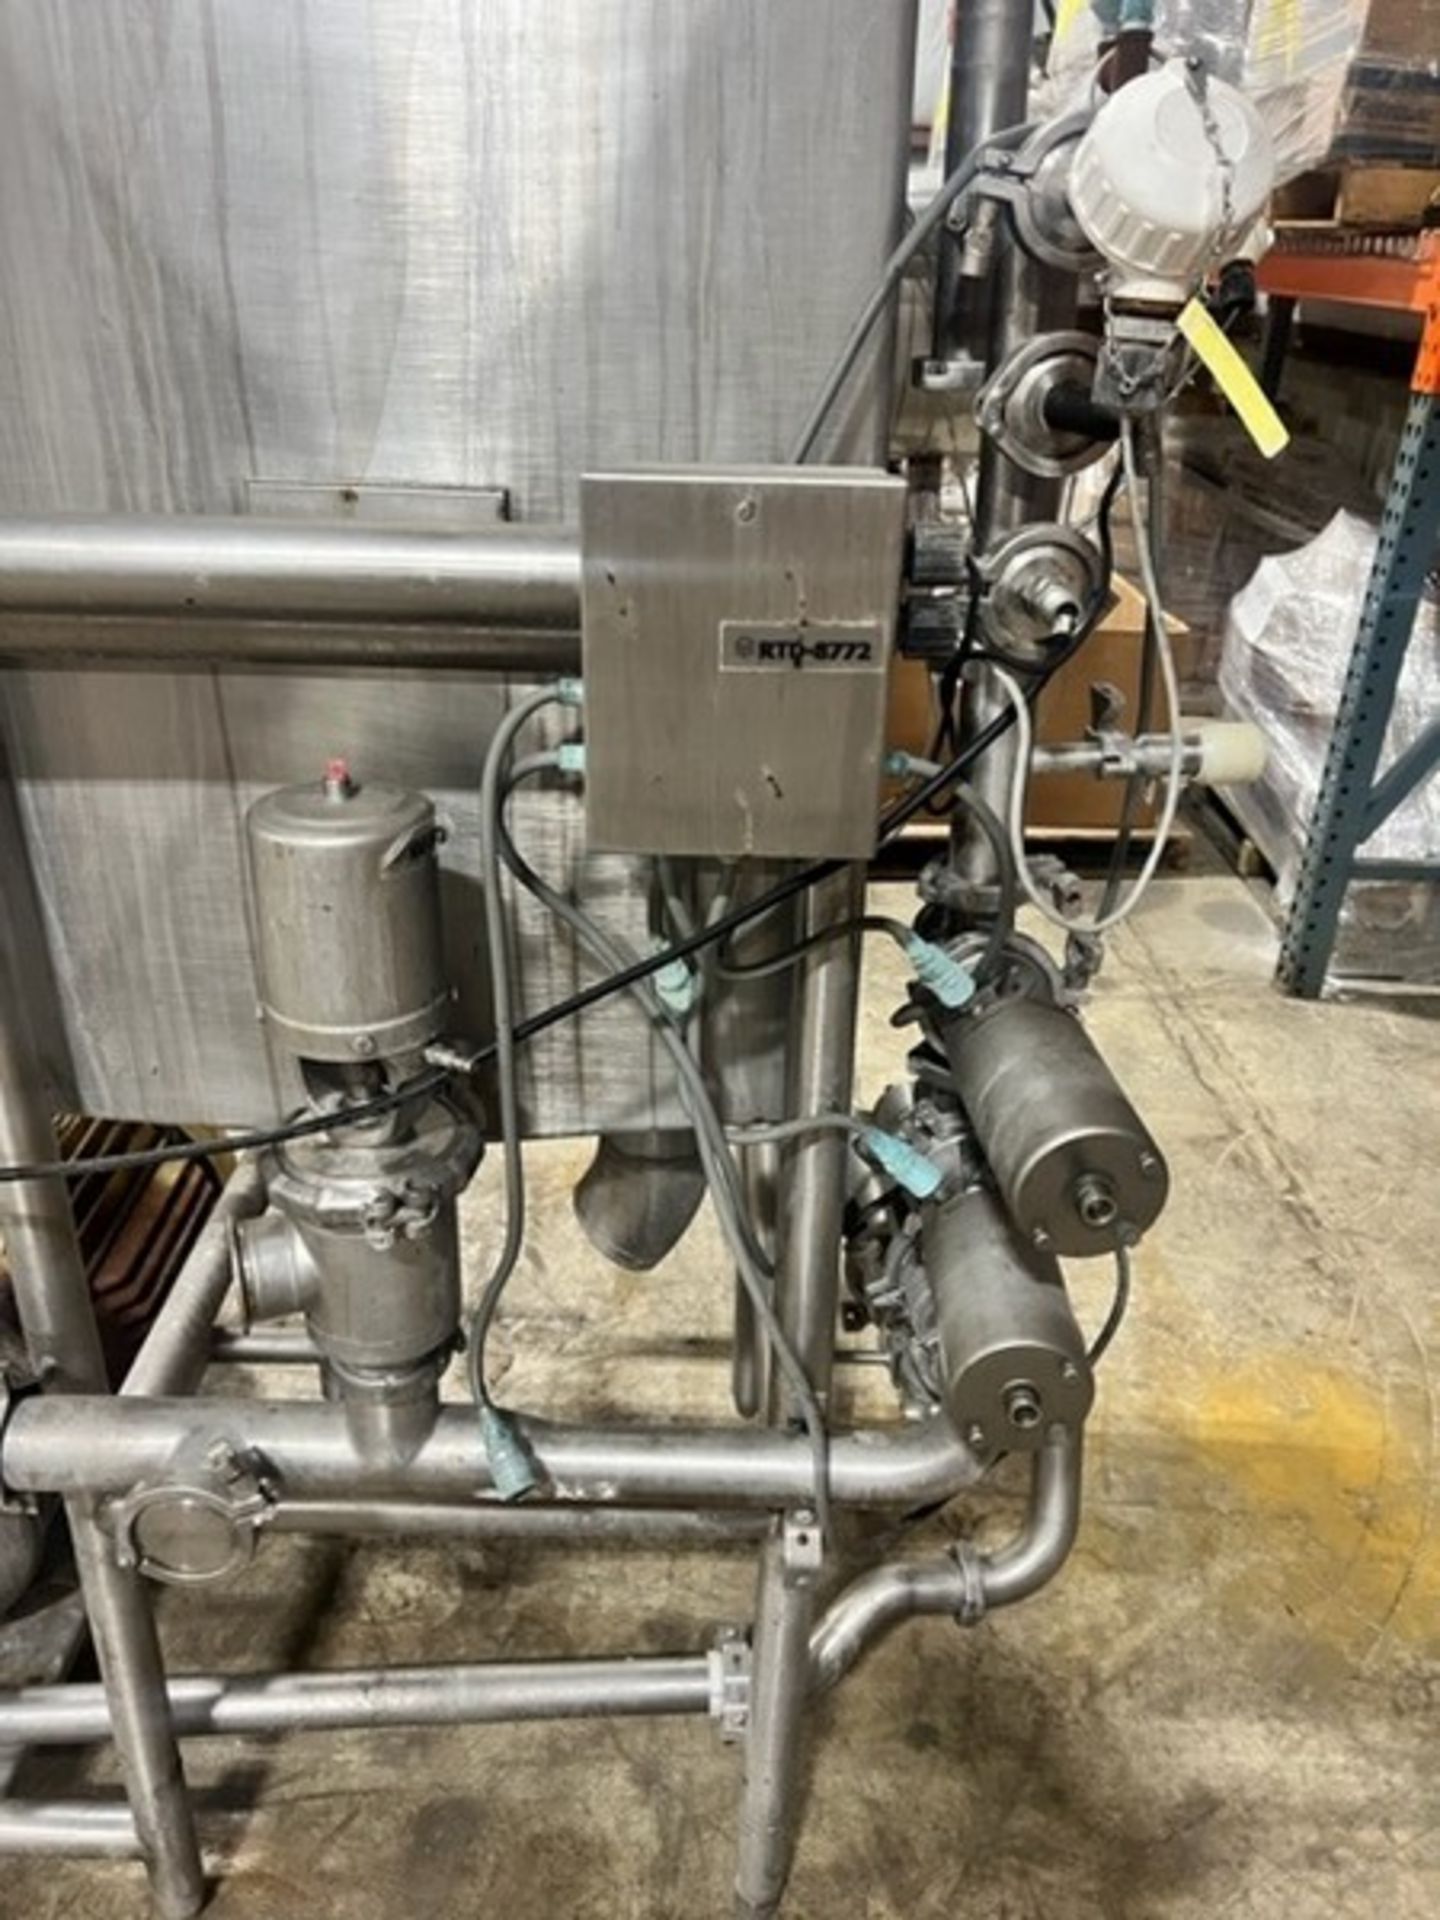 Aprox. 60 Gal. CIP Skid with Valving, Ampco 20 hp Pump - 3520 RPM, Tubular Heat Exchanger, S/S - Image 4 of 9